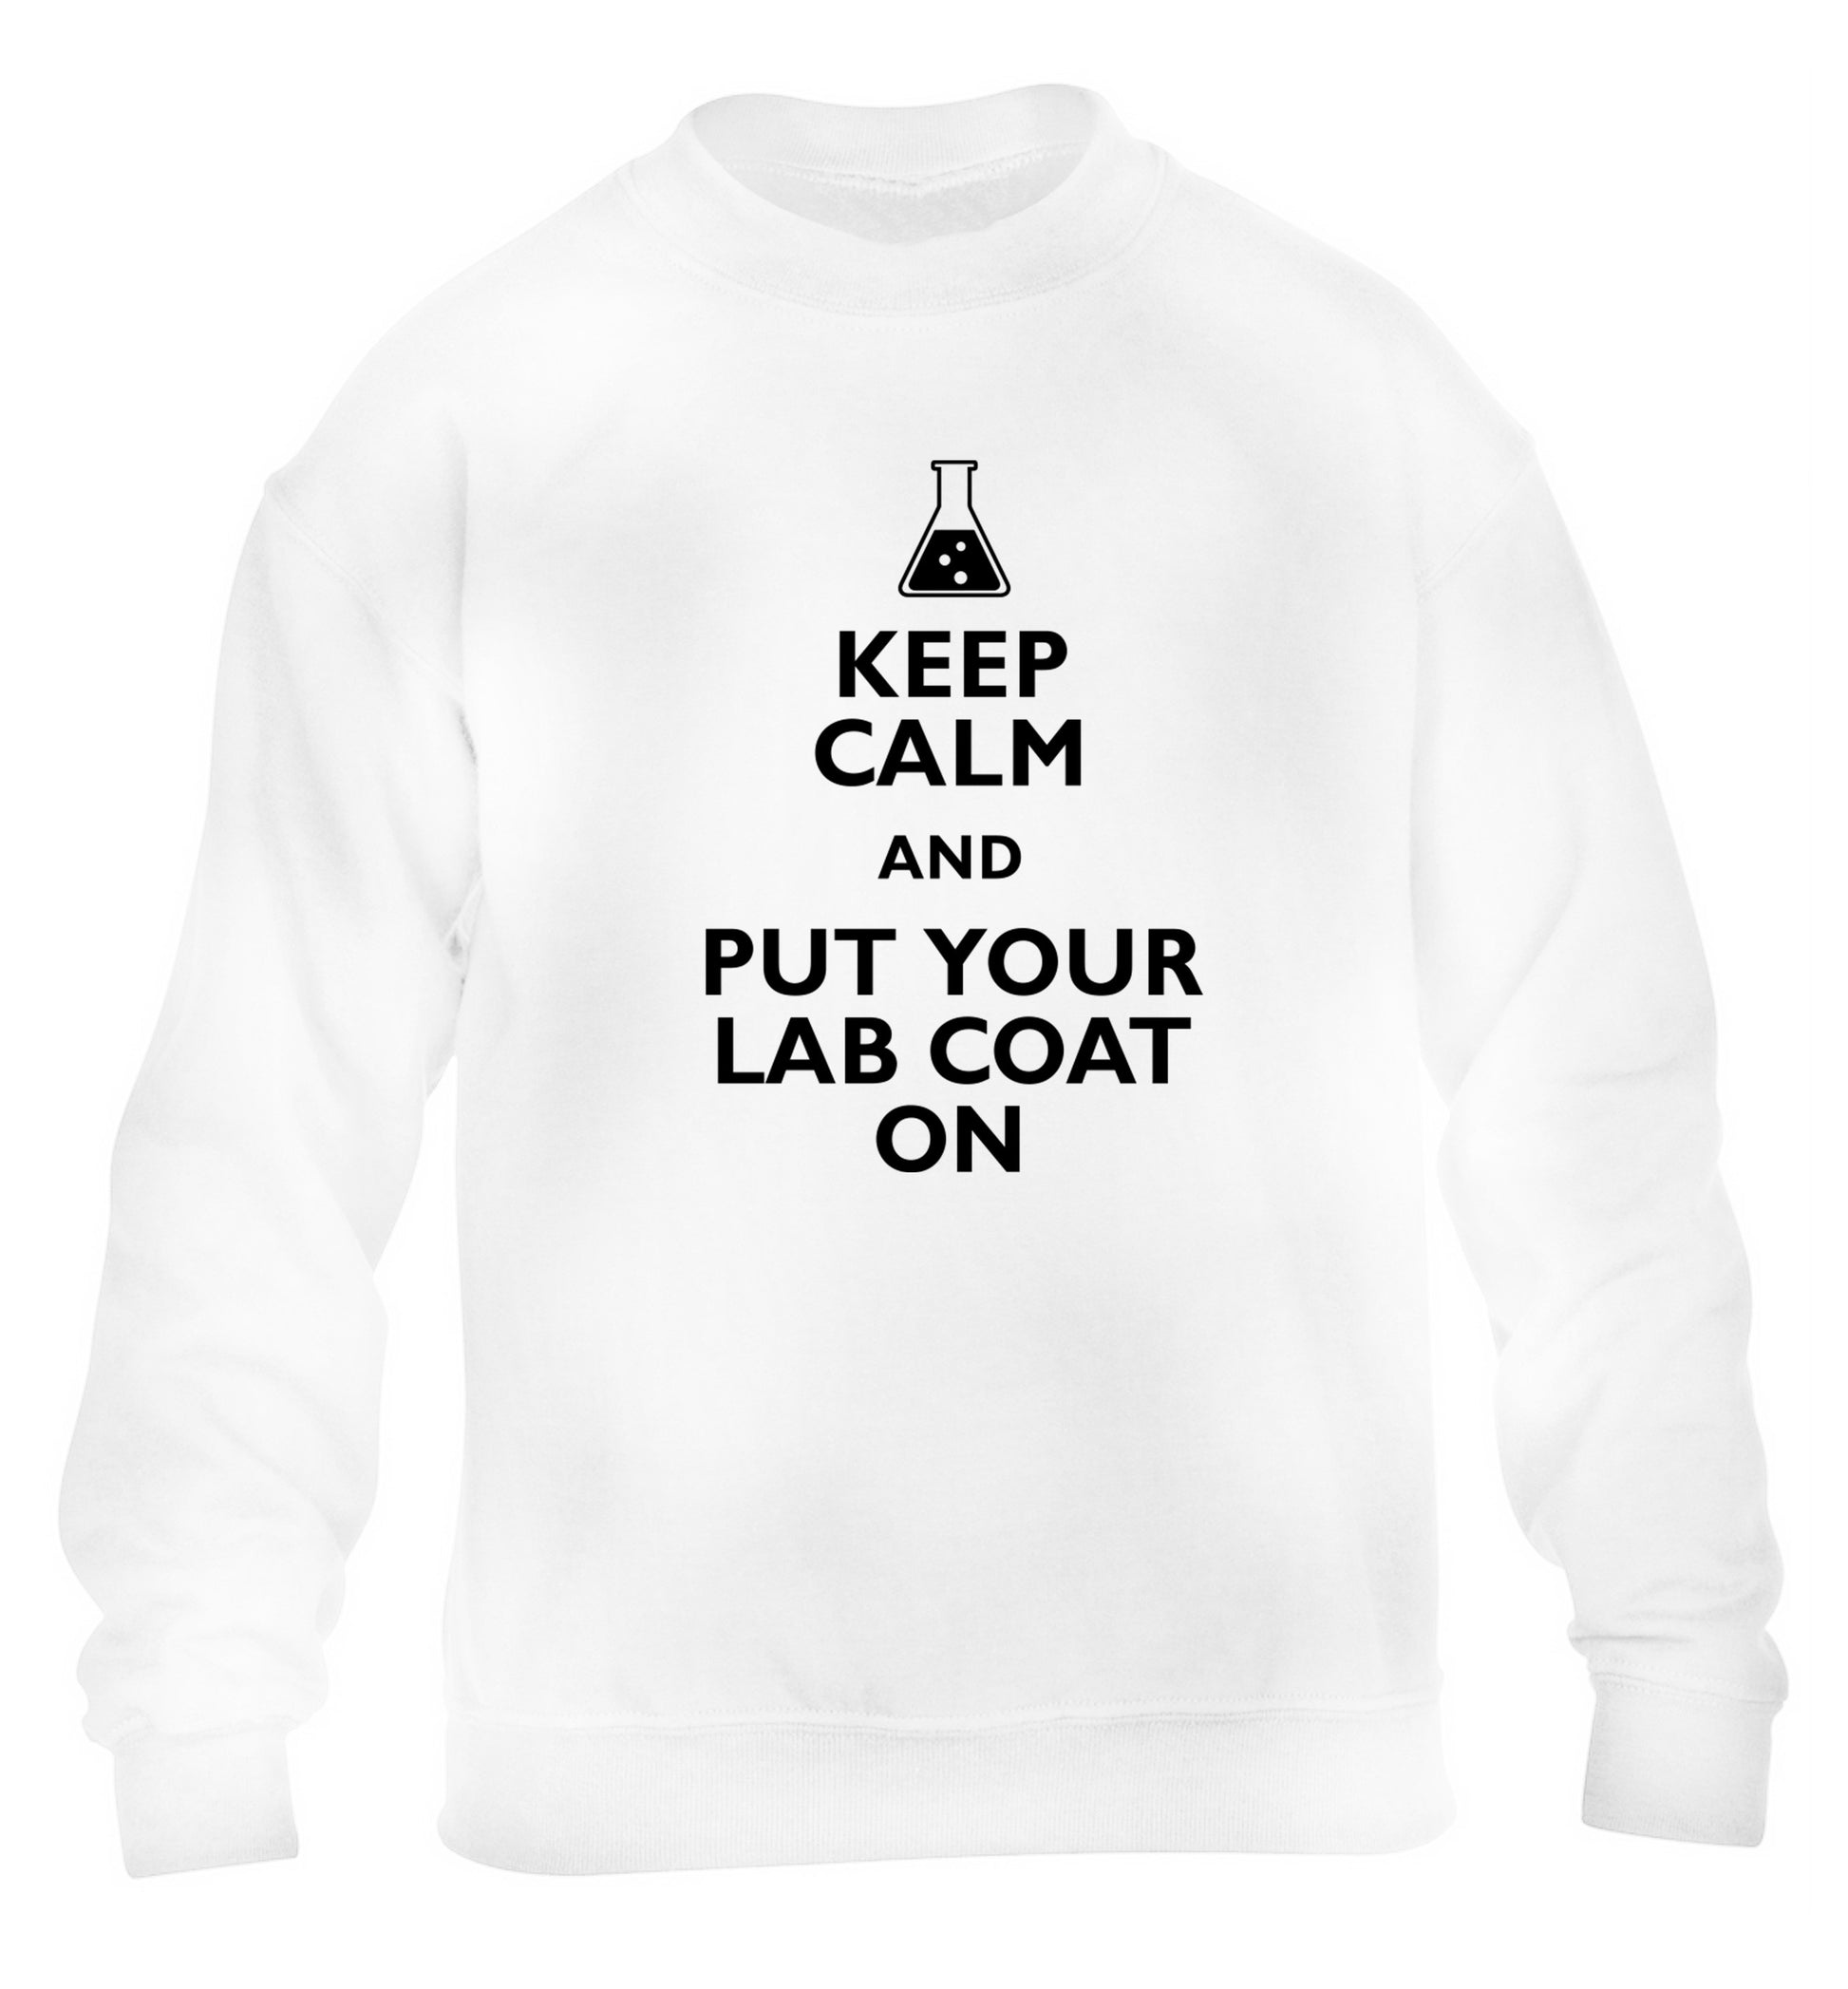 Keep calm and put your lab coat on children's white sweater 12-14 Years